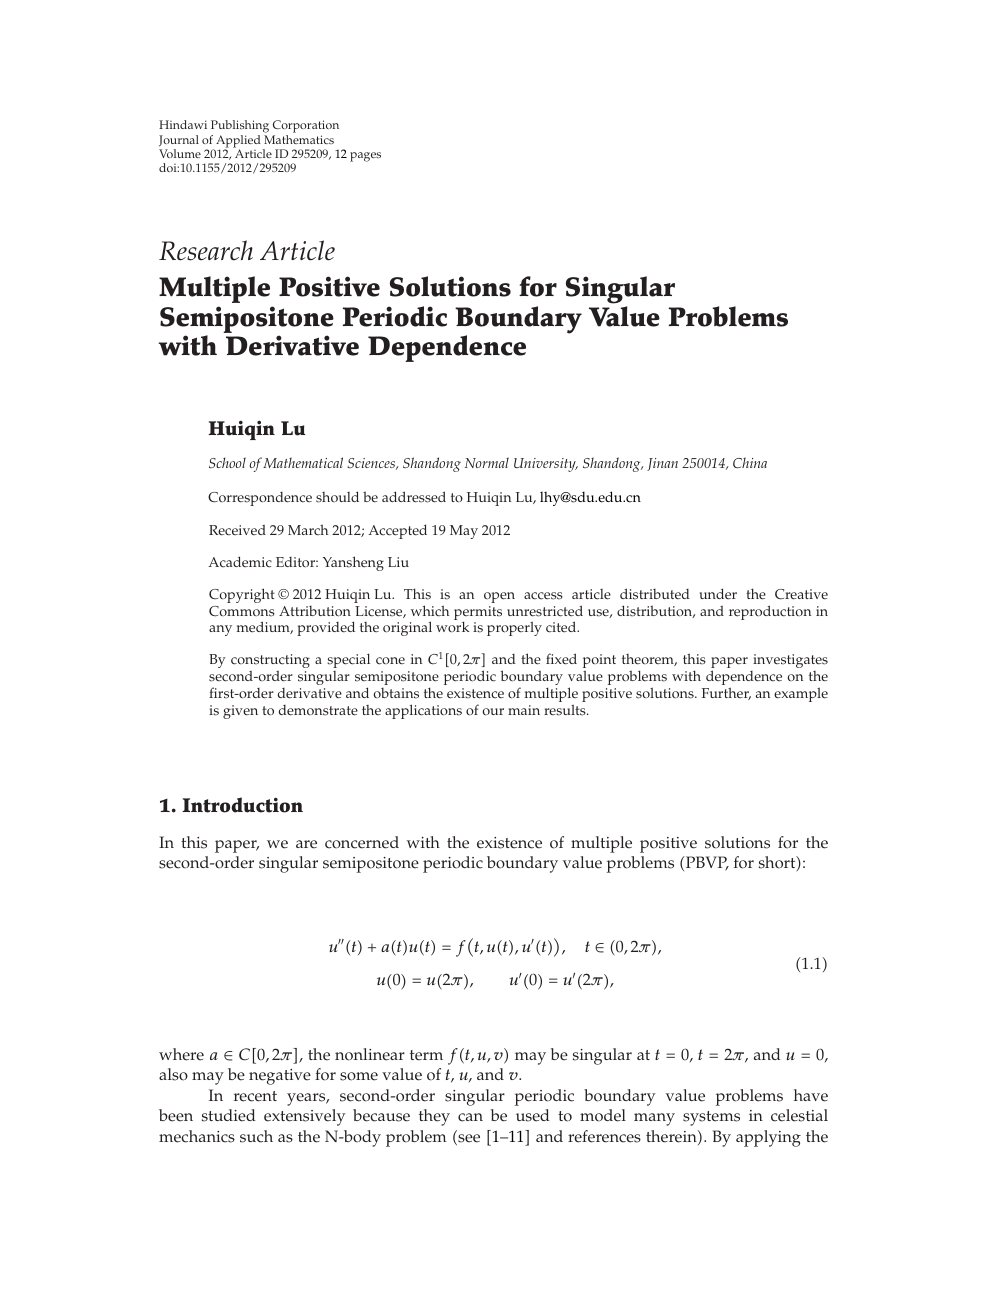 Multiple Positive Solutions For Singular Semipositone Periodic Boundary Value Problems With Derivative Dependence Topic Of Research Paper In Mathematics Download Scholarly Article Pdf And Read For Free On Cyberleninka Open Science